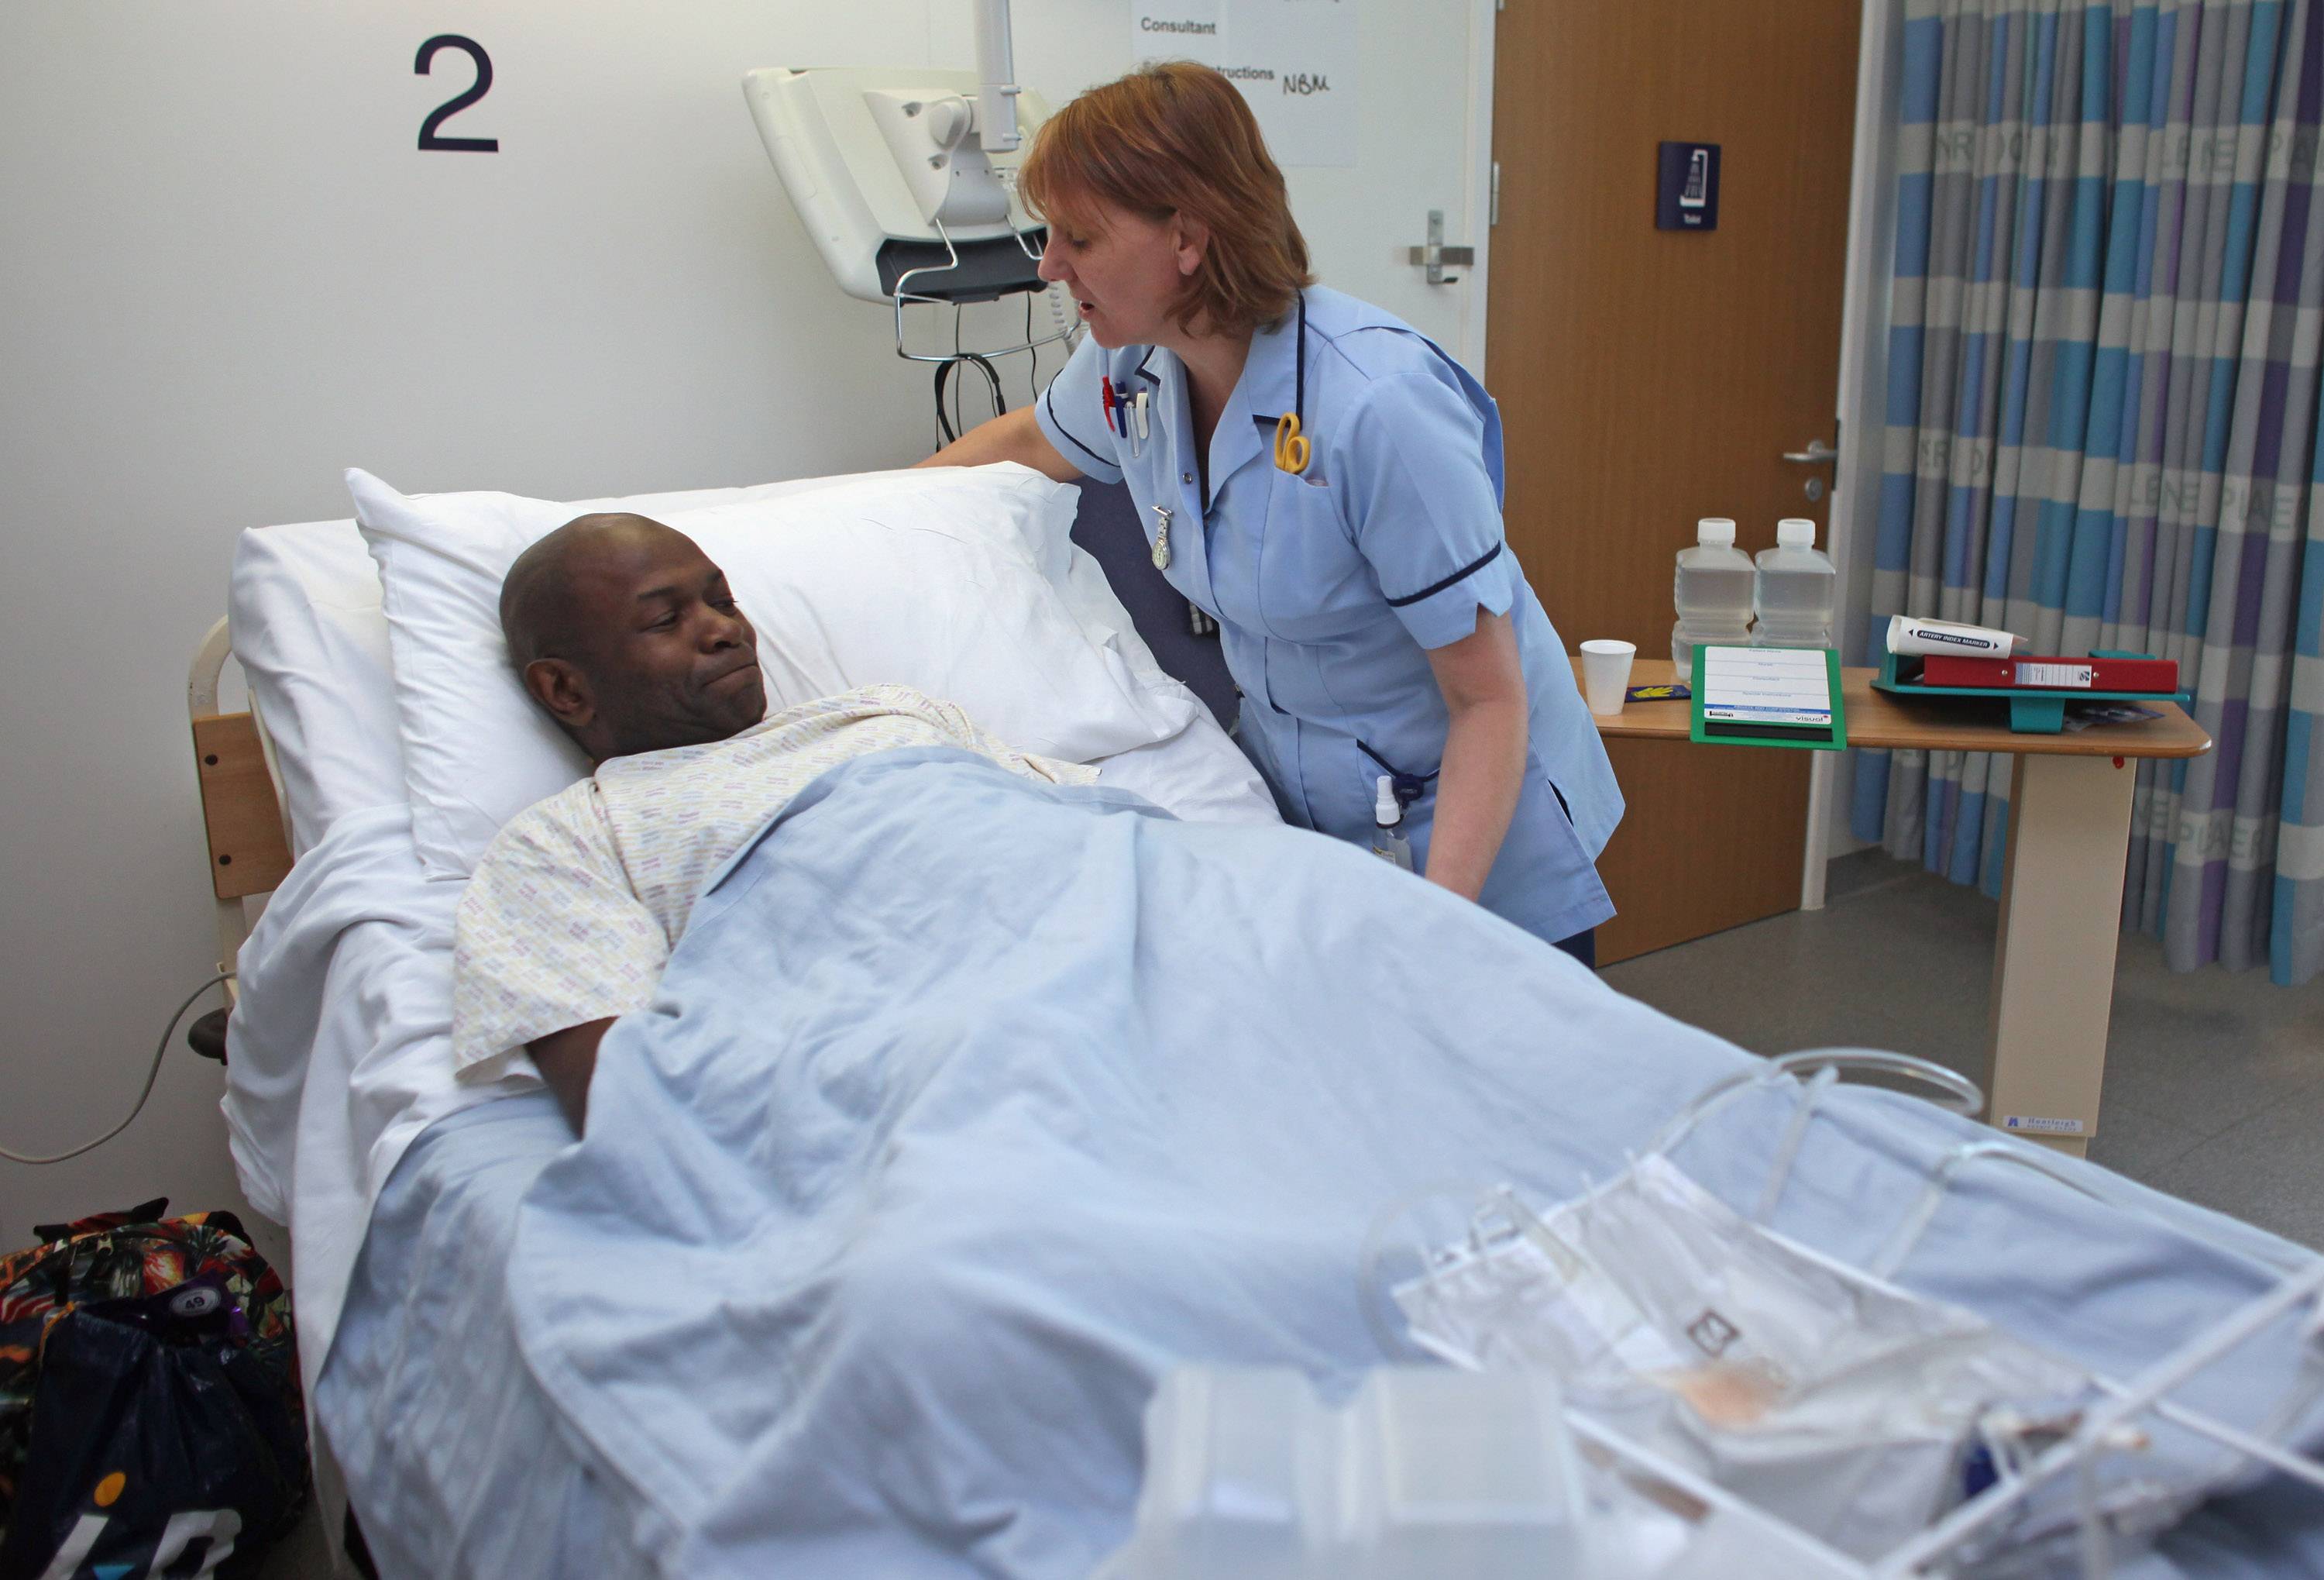 Are Black Men With Cancer Receiving Worse Follow Up Care?